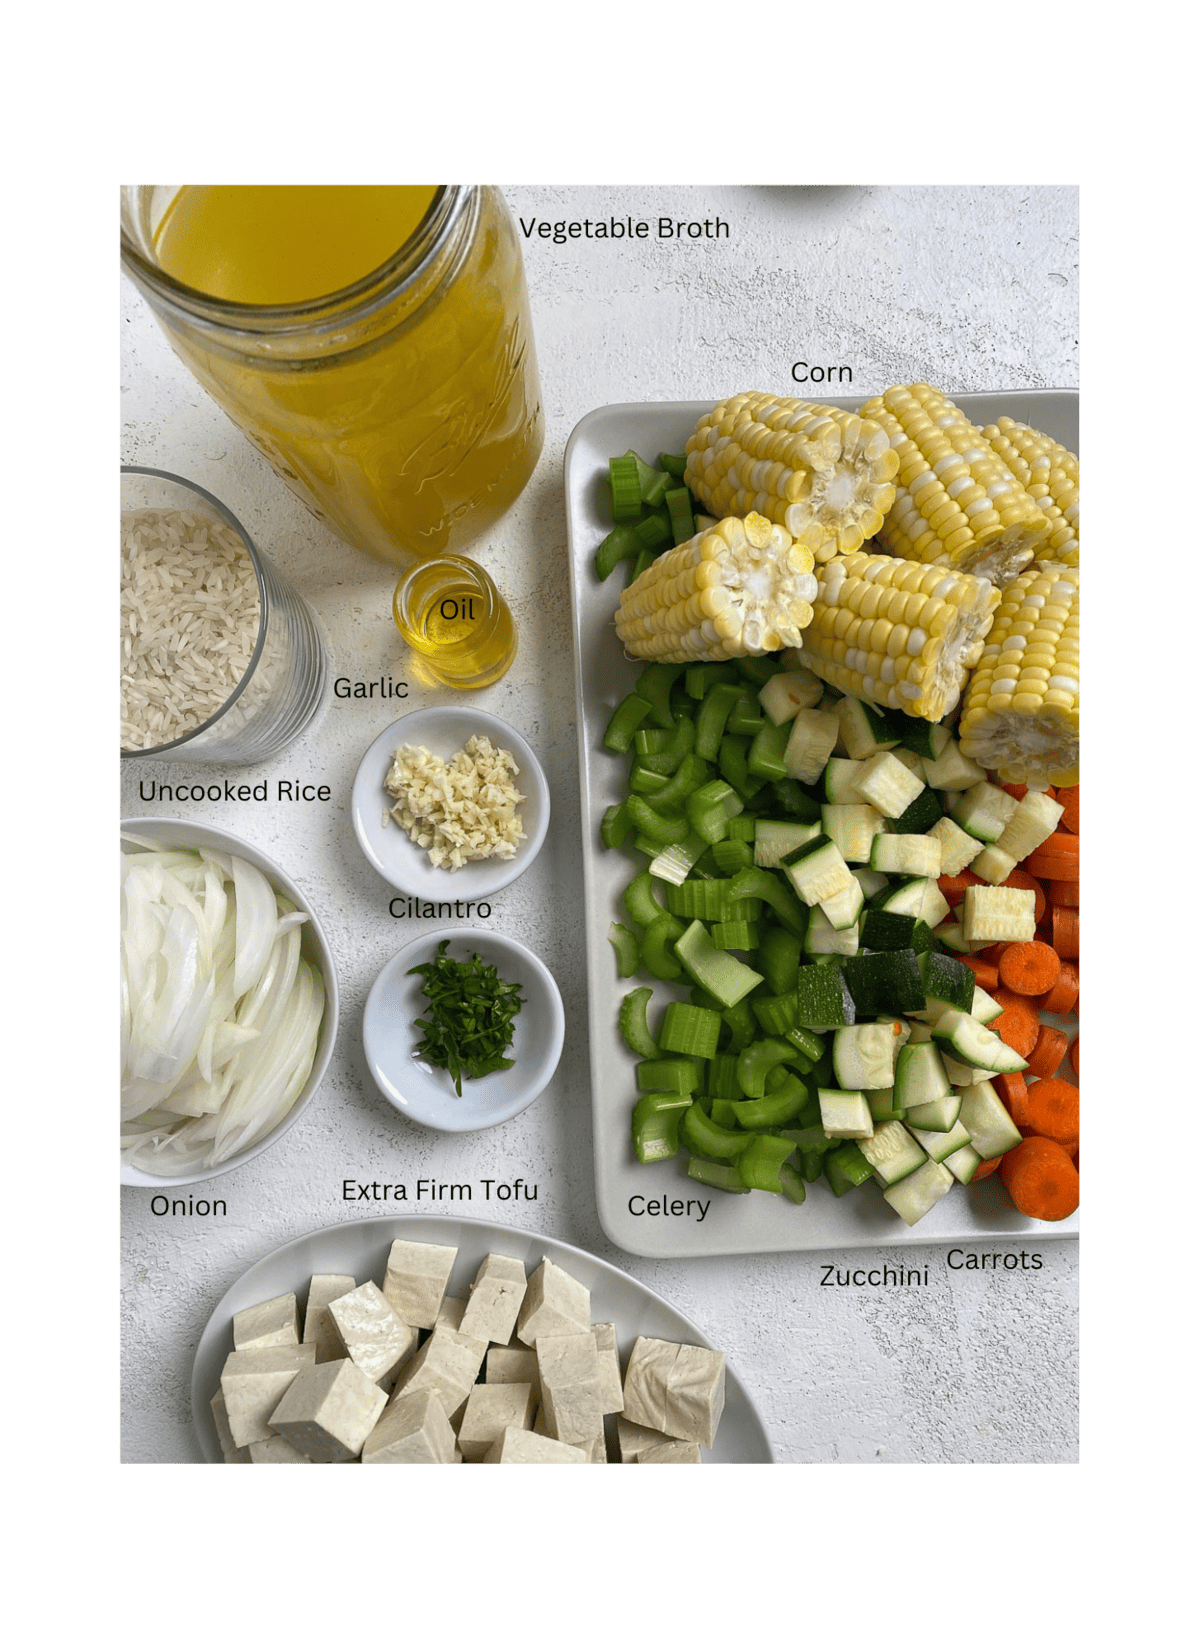 ingredients for Caldo de Tofu measured out against a white surface